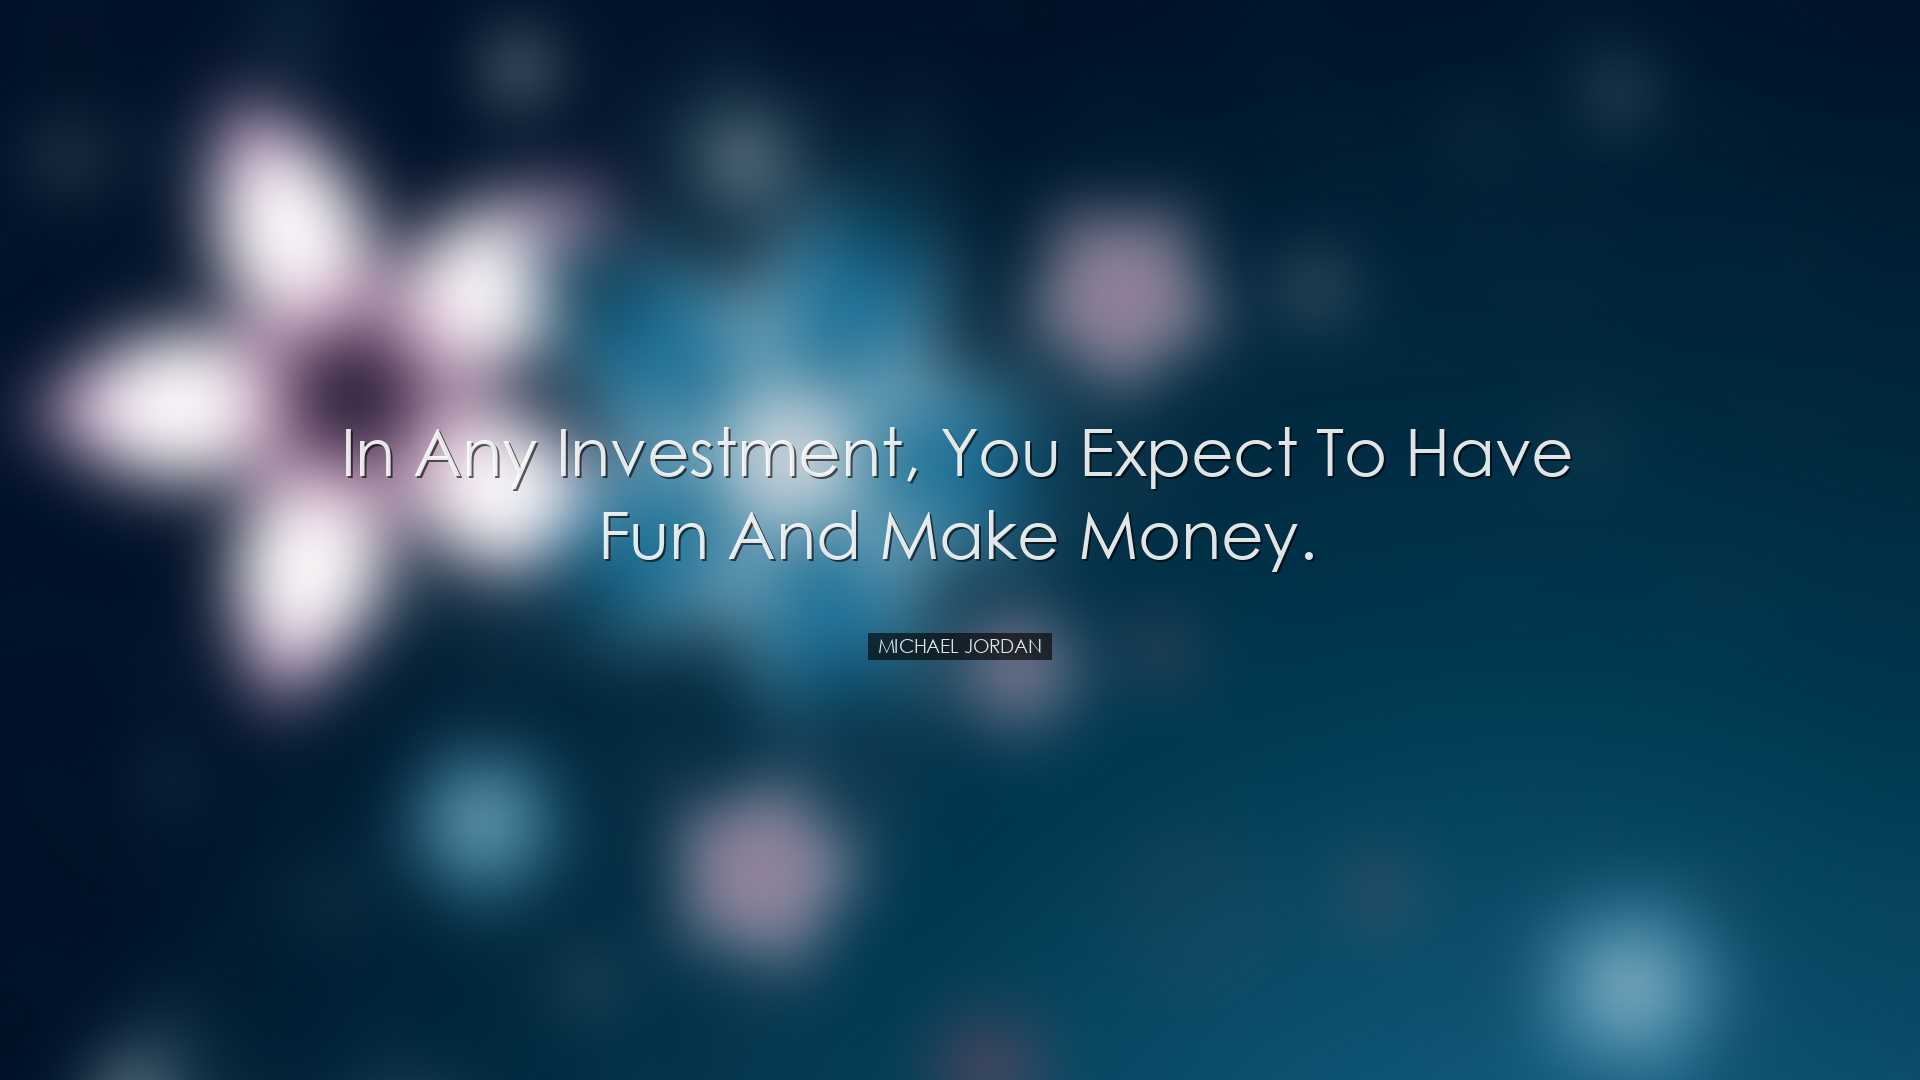 In any investment, you expect to have fun and make money. - Michae